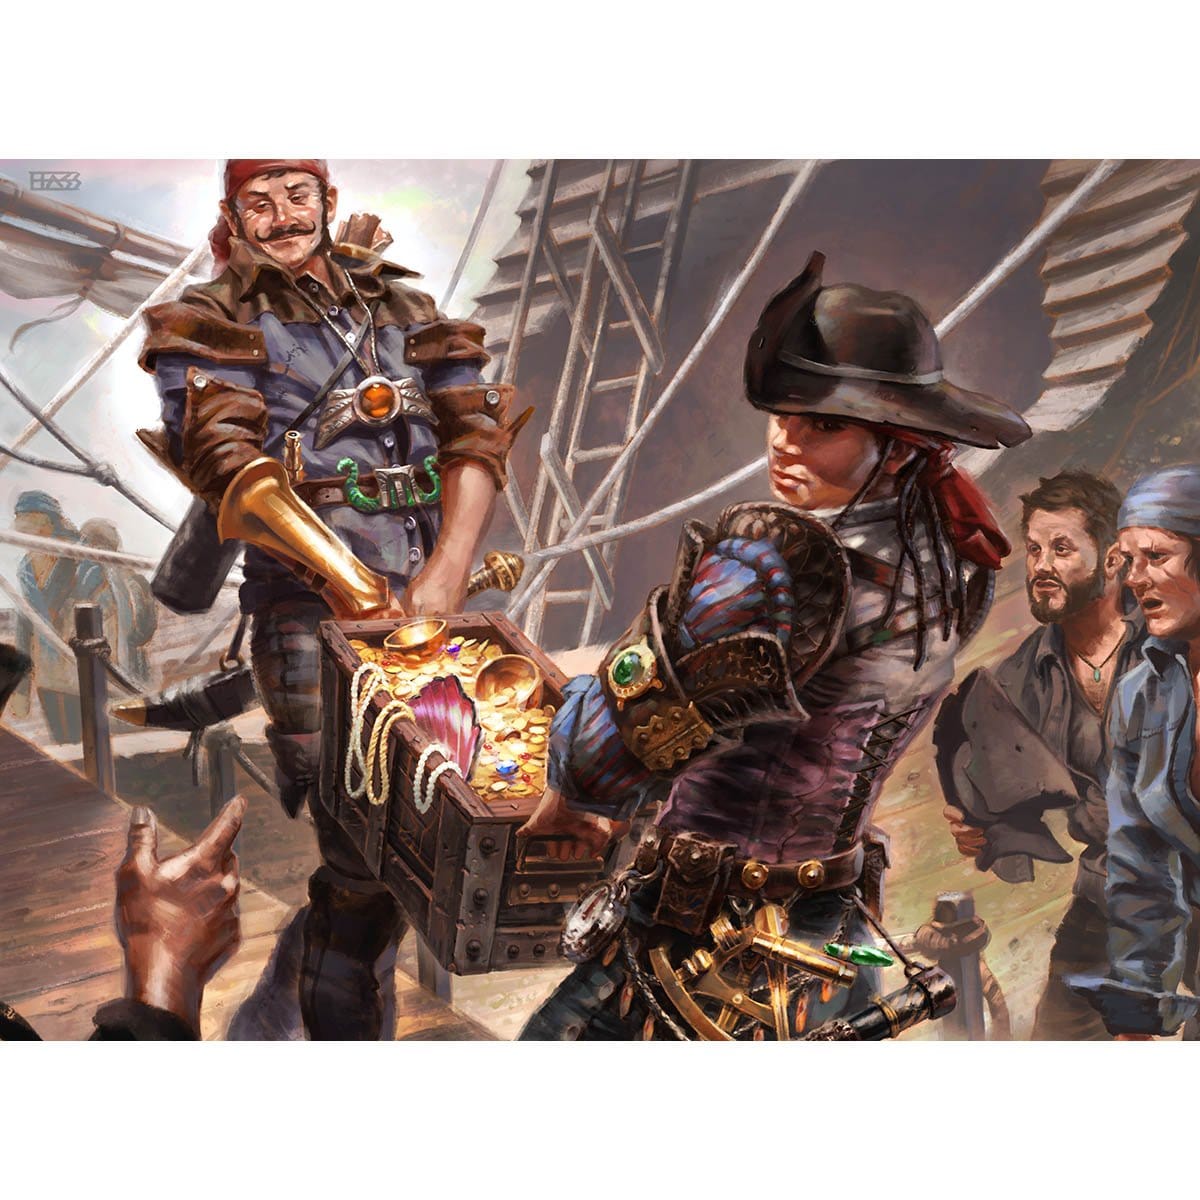 Prosperous Pirates Print - Print - Original Magic Art - Accessories for Magic the Gathering and other card games